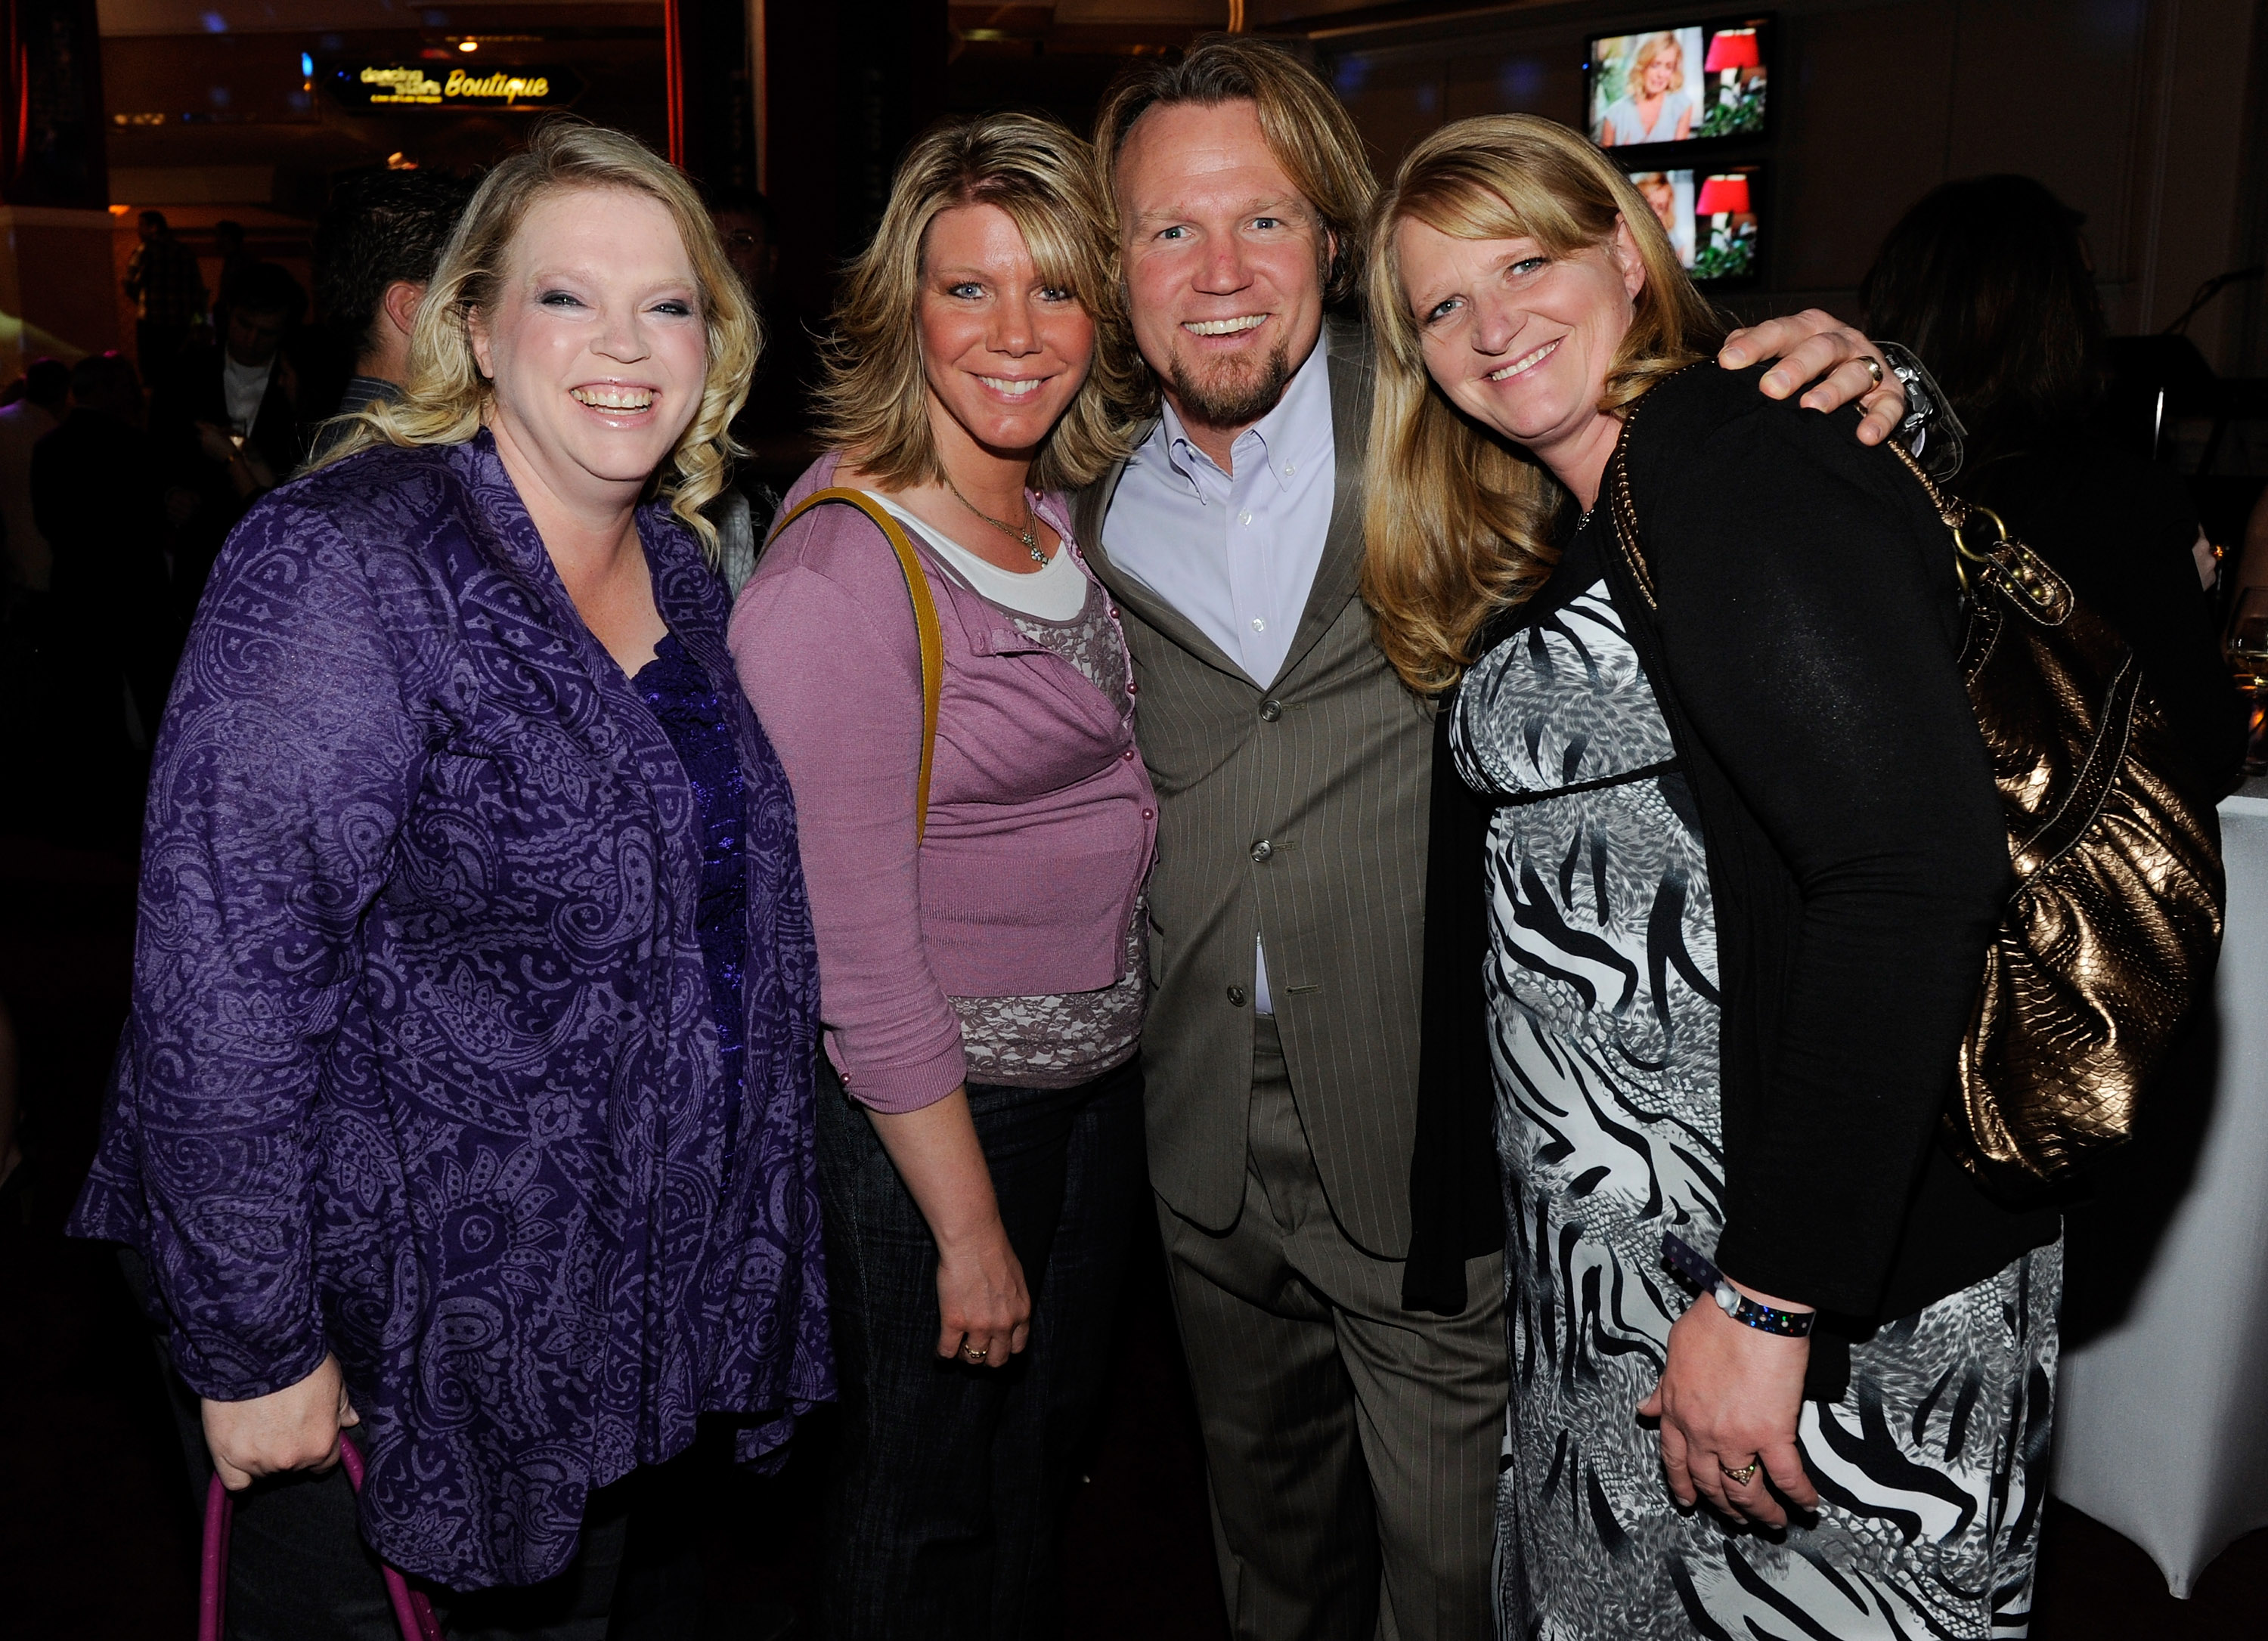 Kody Brown of 'Sister Wives' poses with his wives Janelle Brown, Meri Brown, and Christine Brown